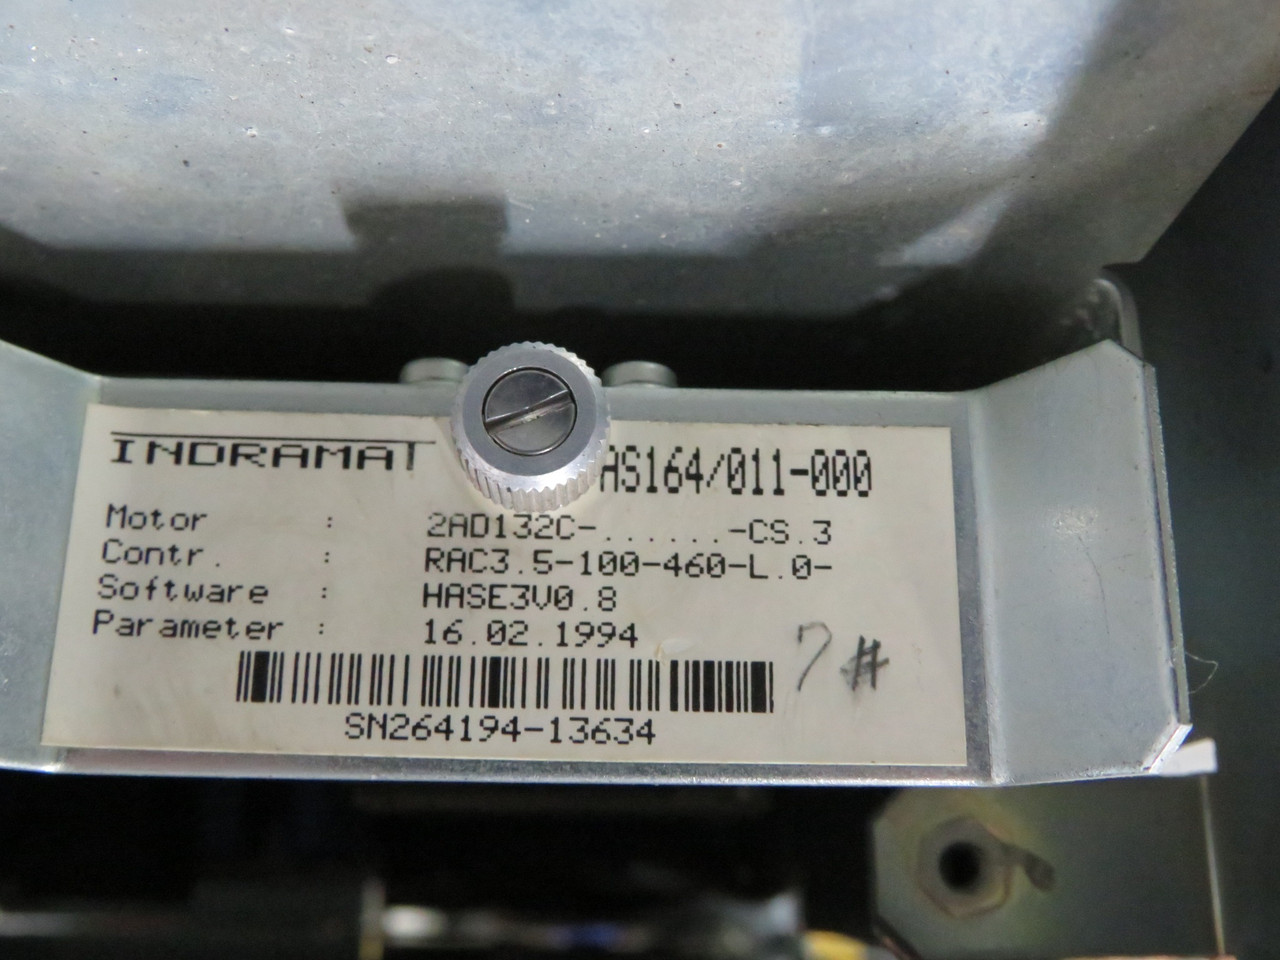 Indramat RAC3.5-100-460-LP0-W1-220 AC Main Spindle Drive BROKEN COVER USED